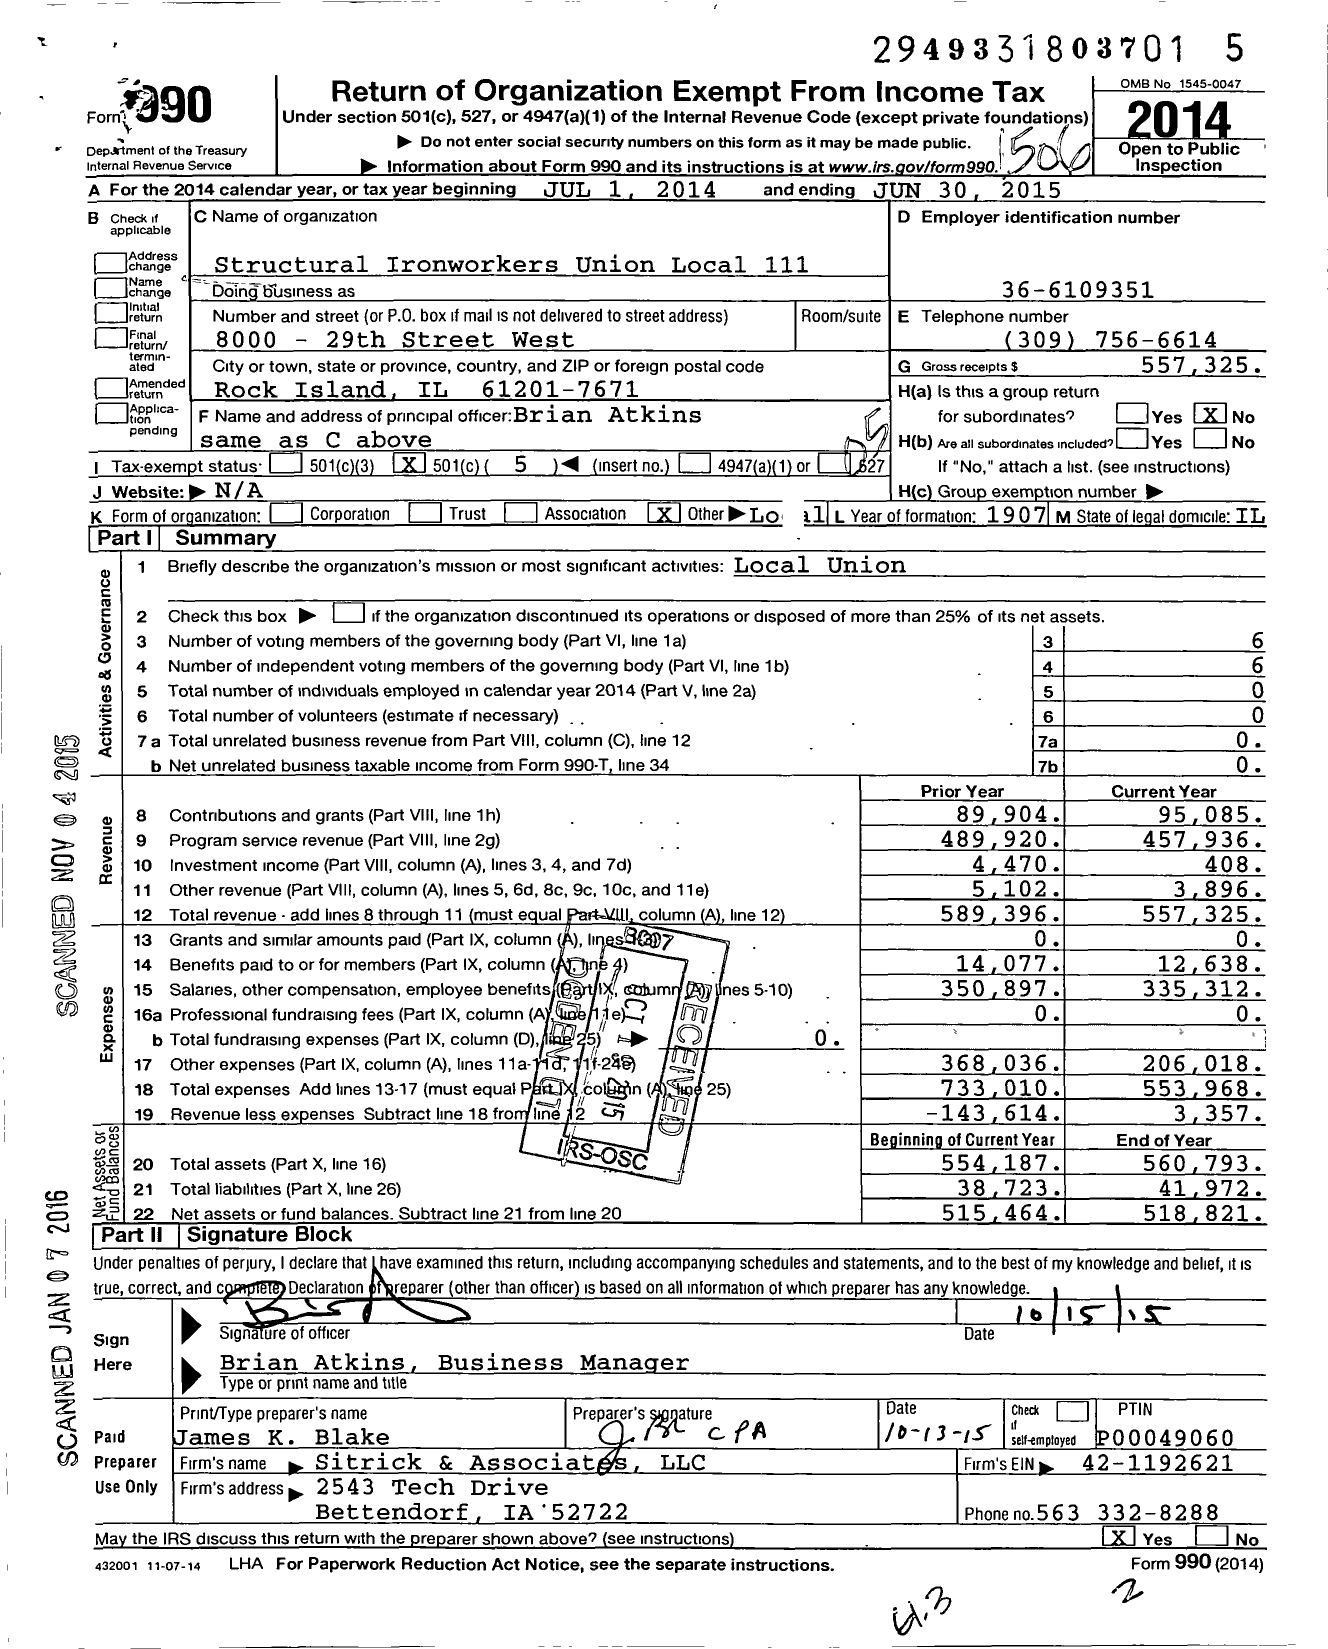 Image of first page of 2014 Form 990O for Structural Ironworkers Union Local